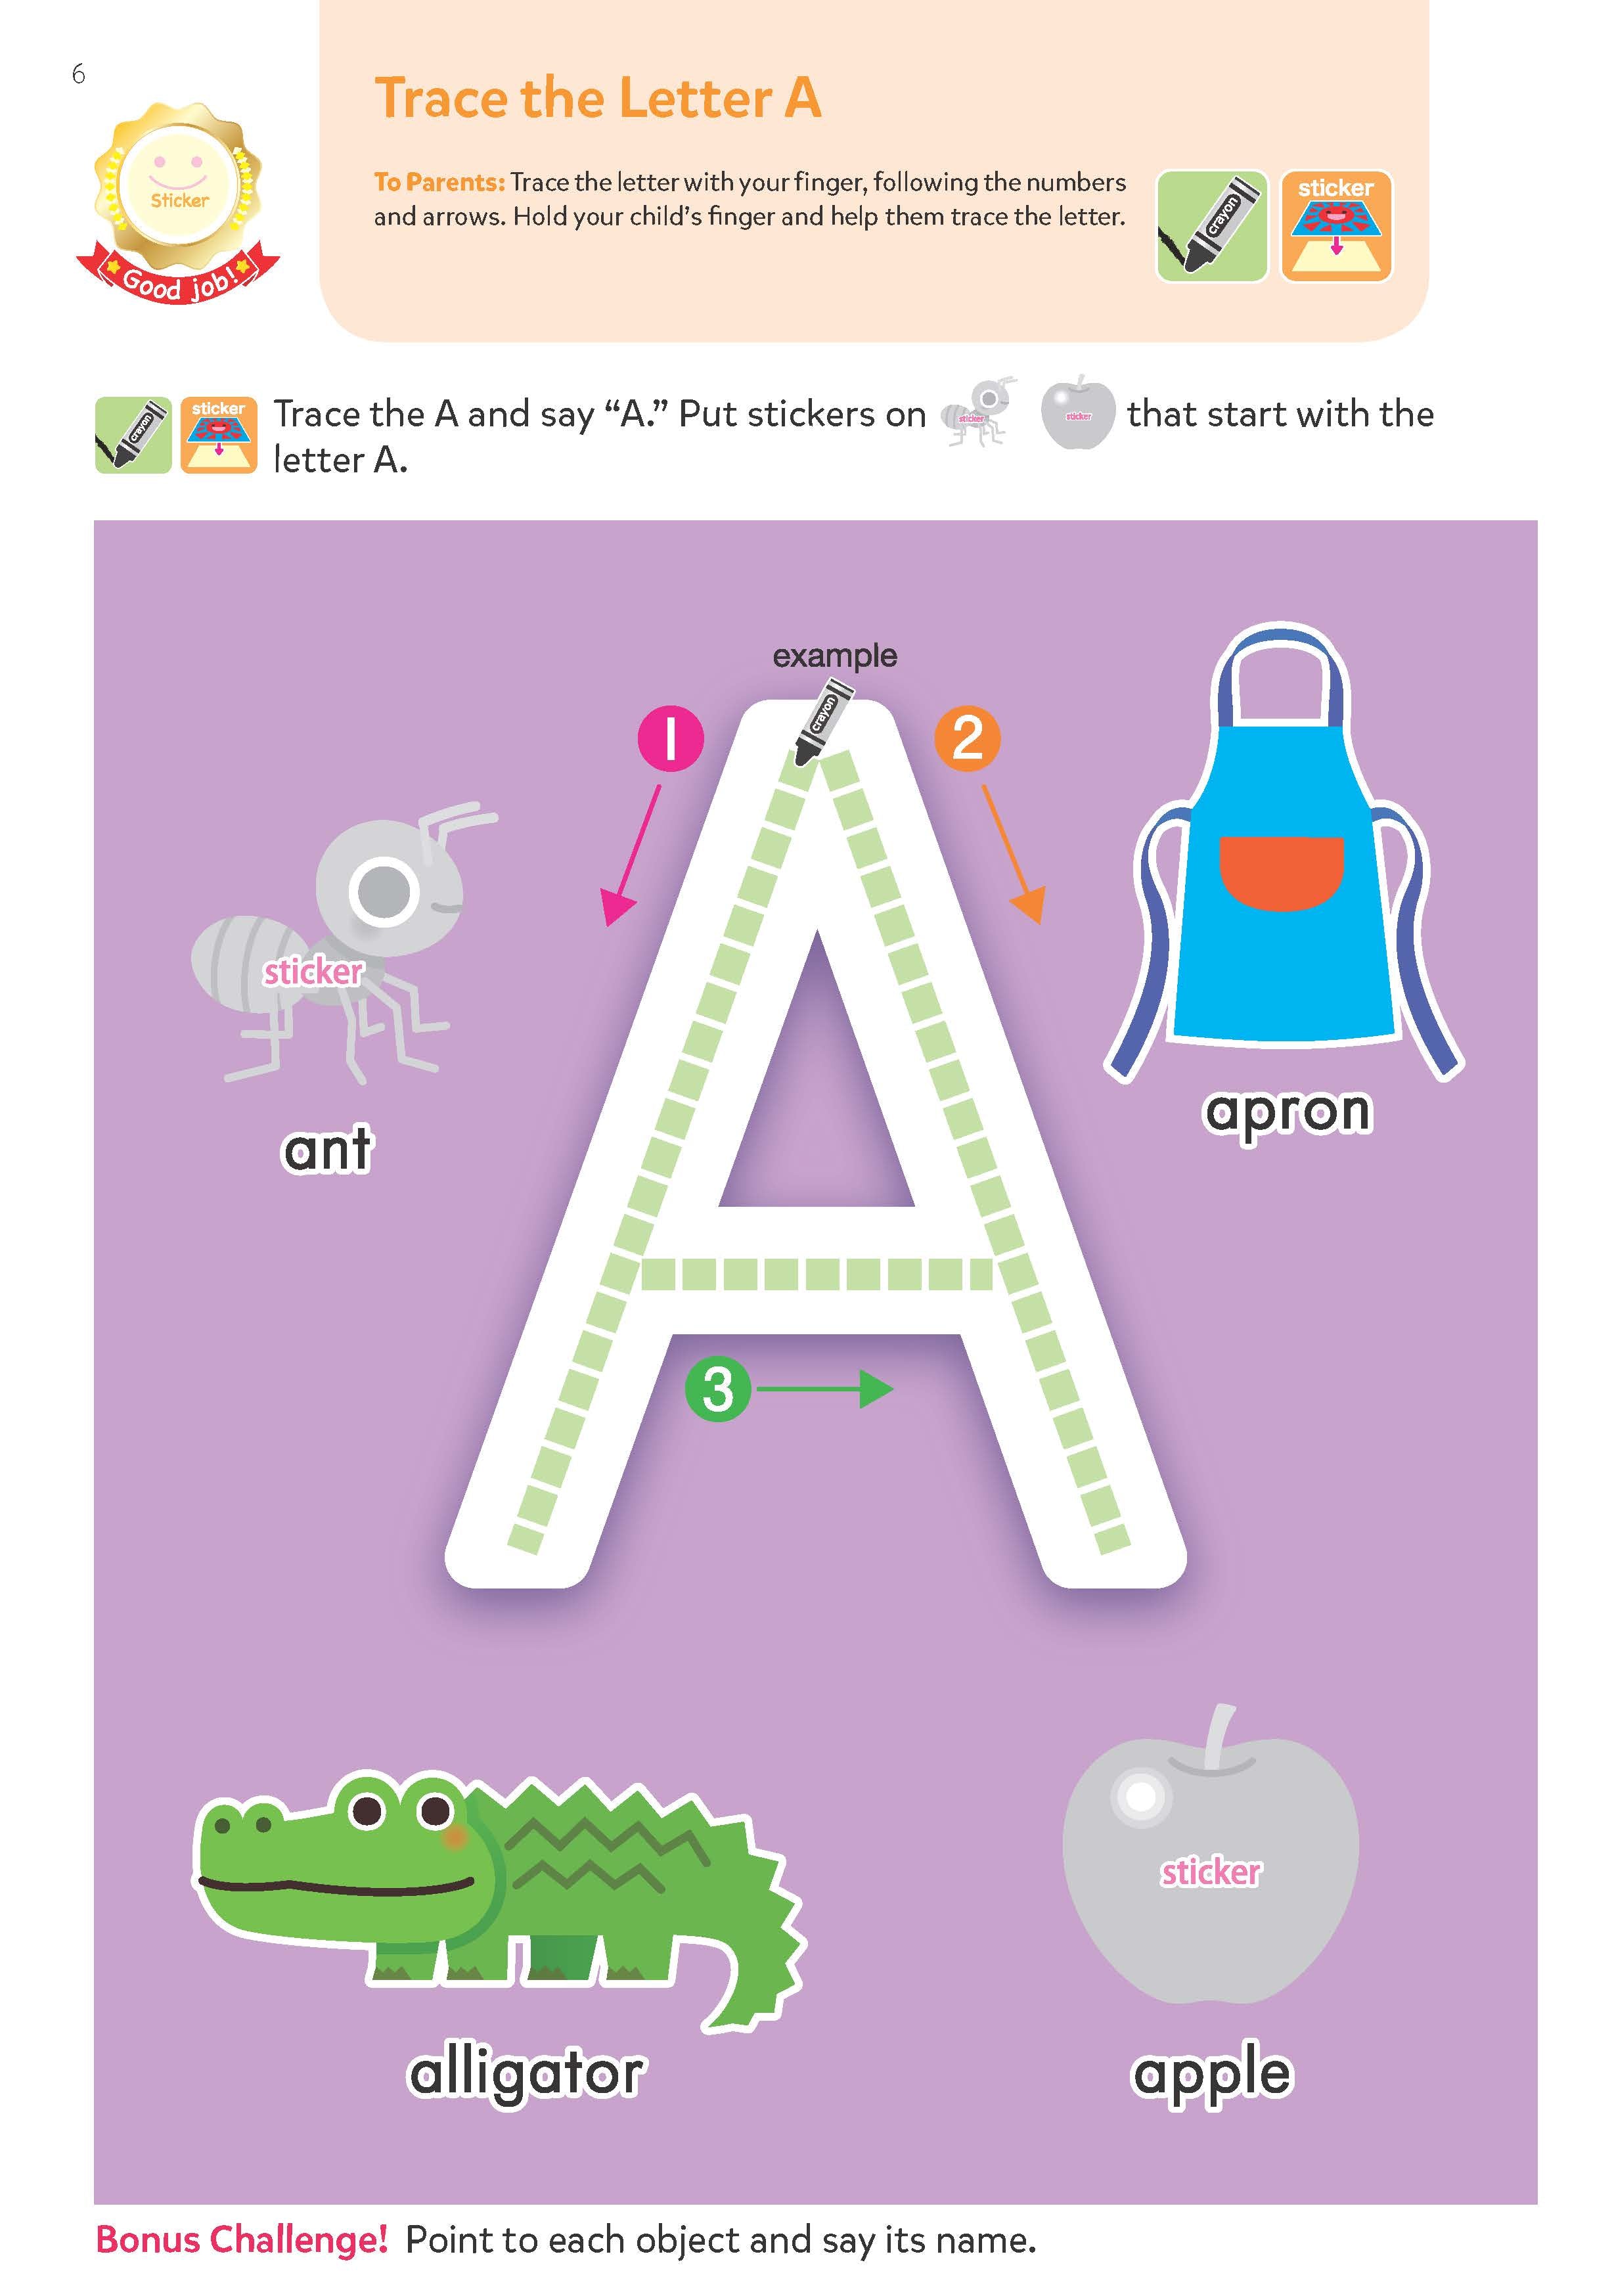 PLAY SMART Early Learning Challenging 2-3